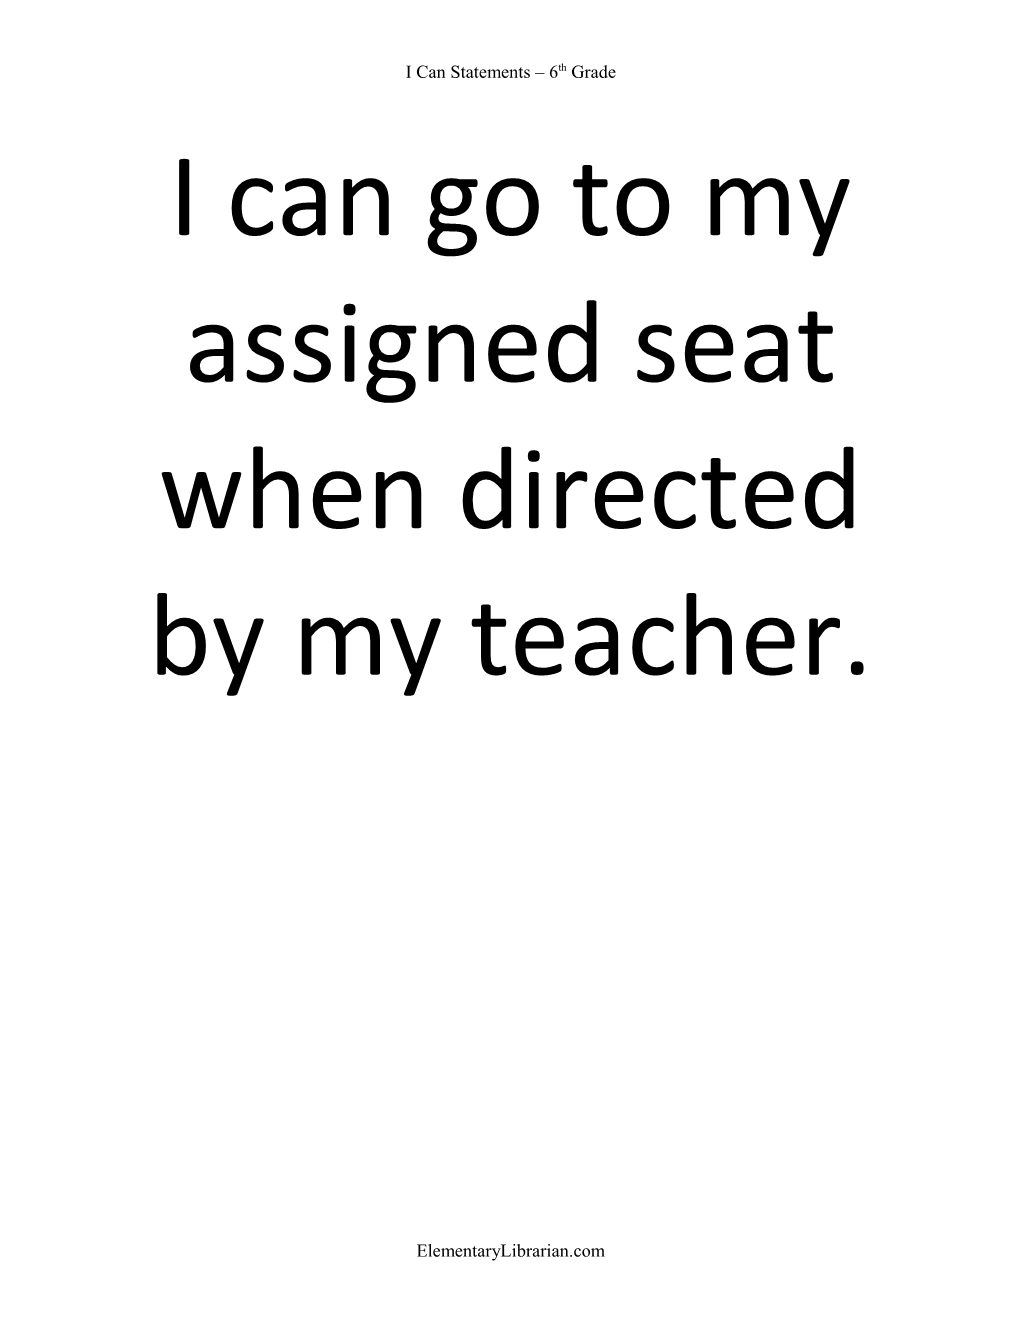 I Can Go to My Assigned Seat When Directed by My Teacher